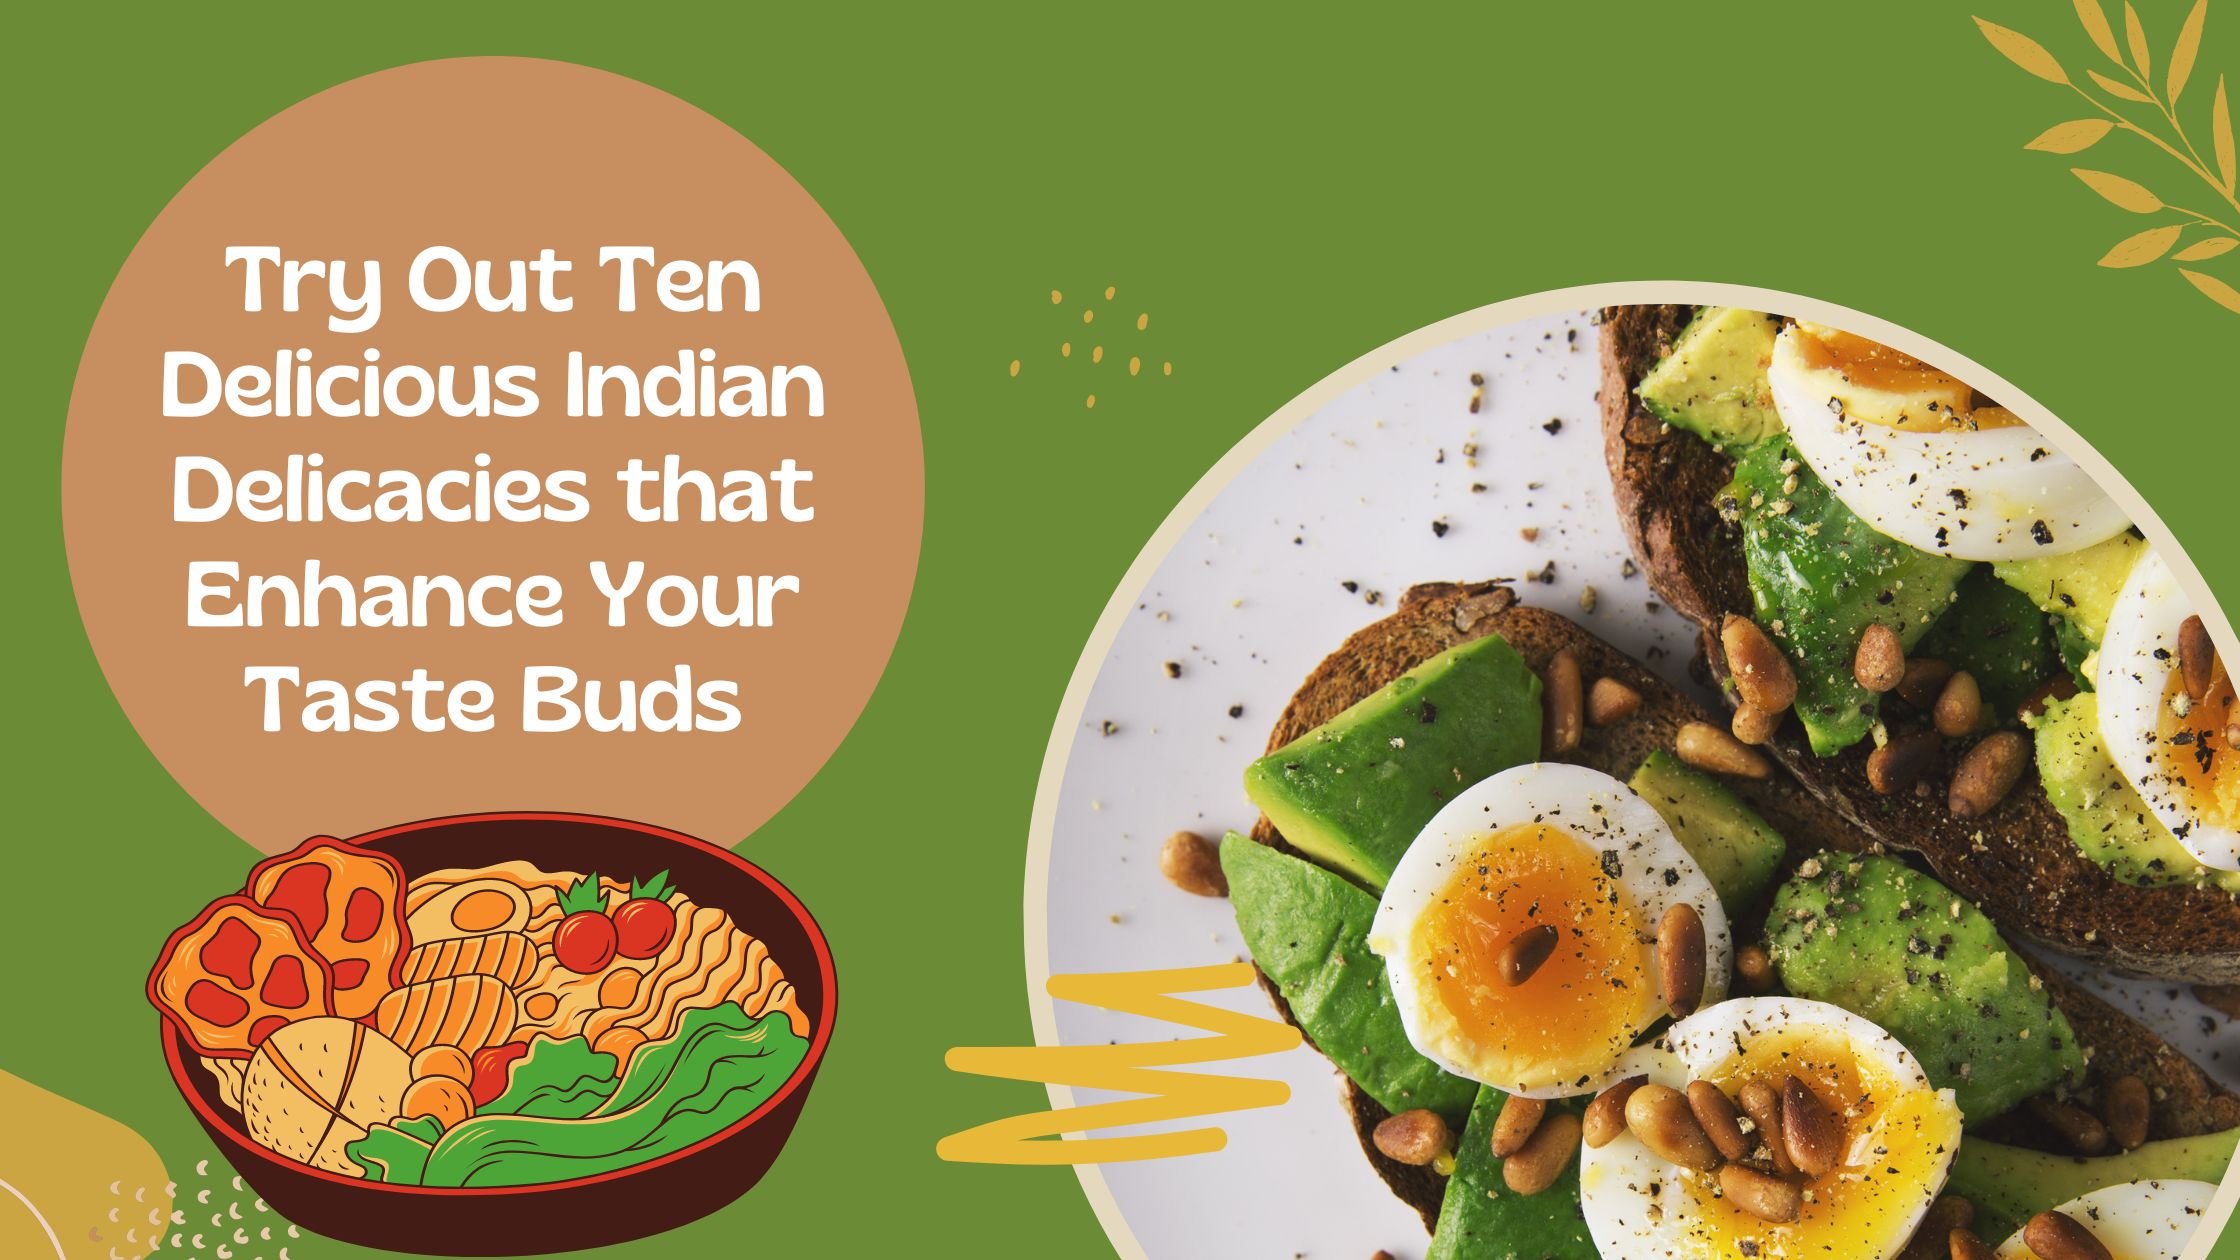 Try Out Ten Delicious Indian Delicacies that Enhance Your Taste Buds